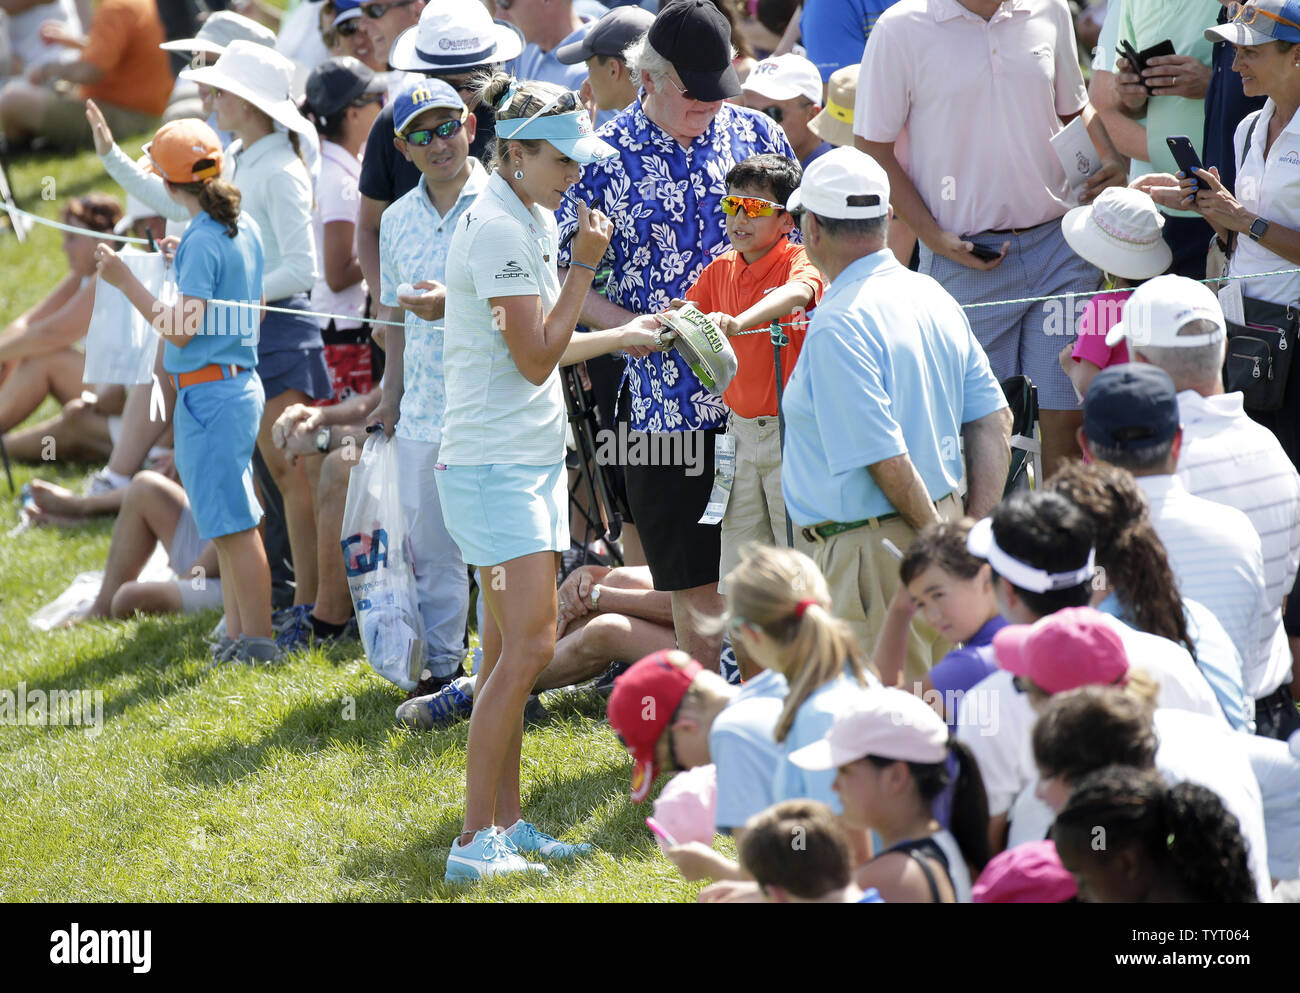 Lexi Thompson signs autographs after her round at Trump National Golf Club after the final round of the LPGA U.S. Women's Open Championship in Bedminster, NJ on July 14, 2017. Sung Hyun Park won her first major with a score of 11 under par.      Photo by John Angelillo/UPI Stock Photo